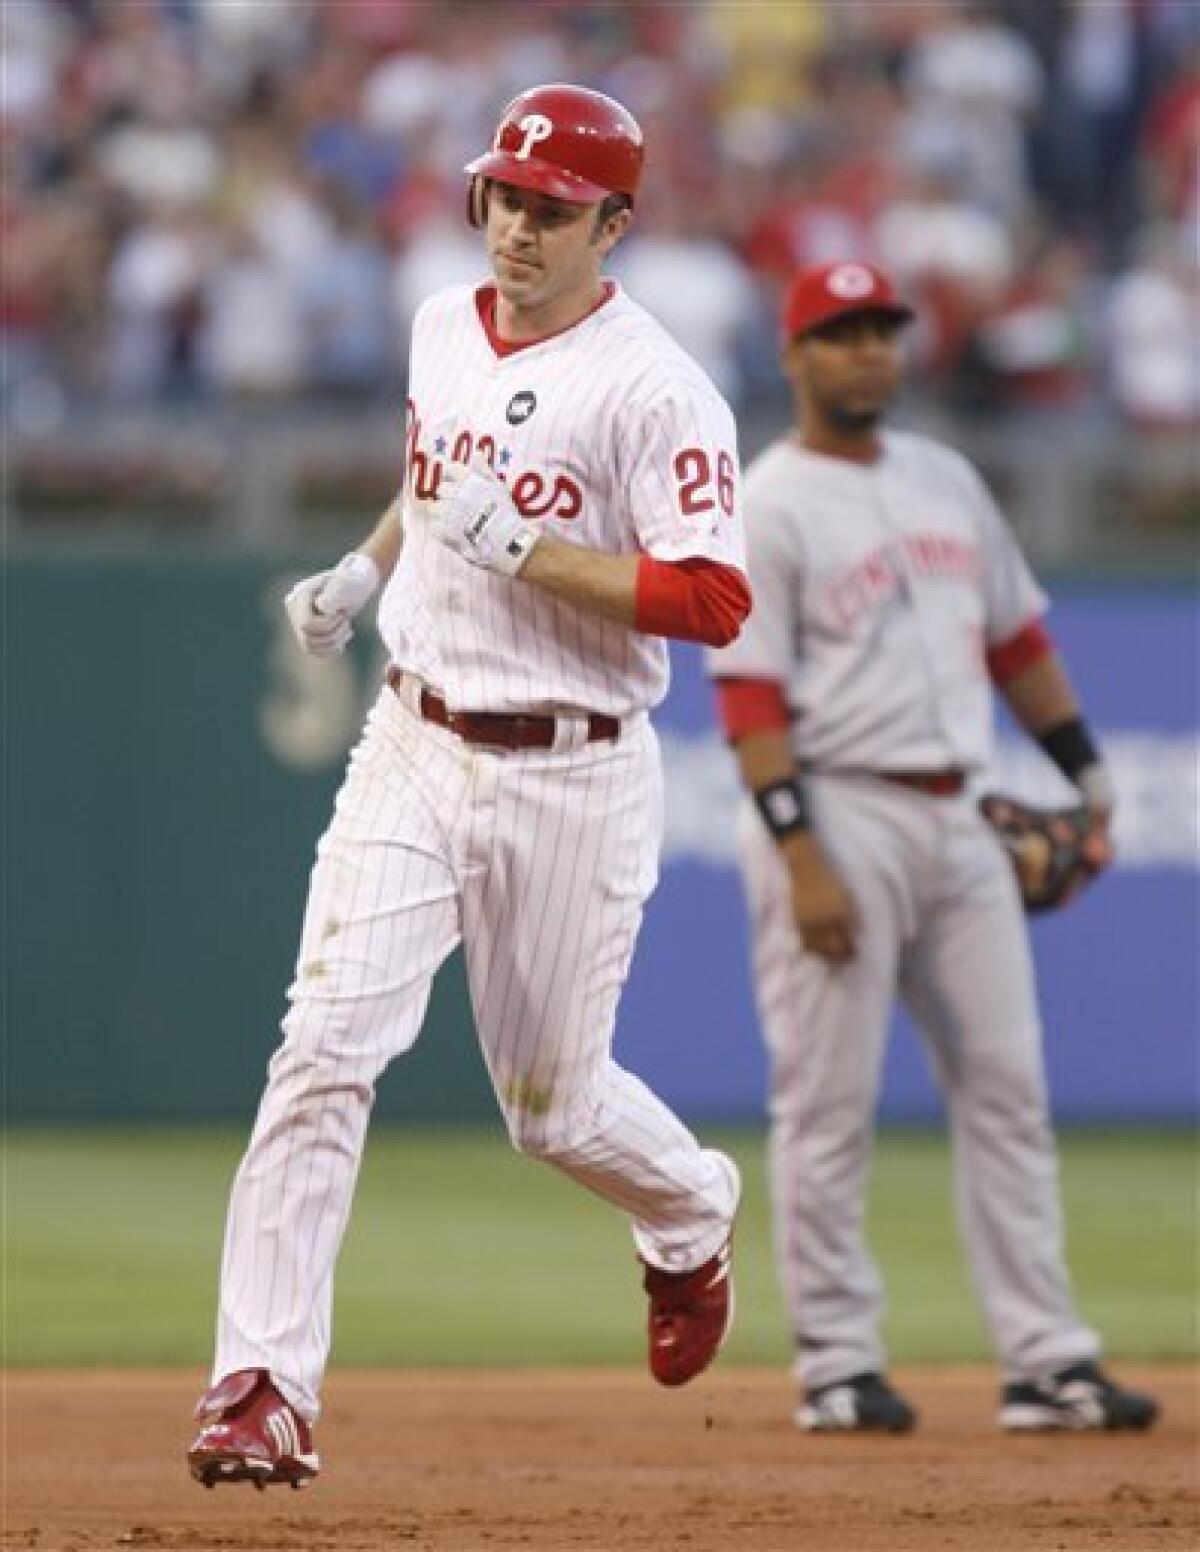 Big first inning leads Phillies over Reds 22-1 - The San Diego Union-Tribune